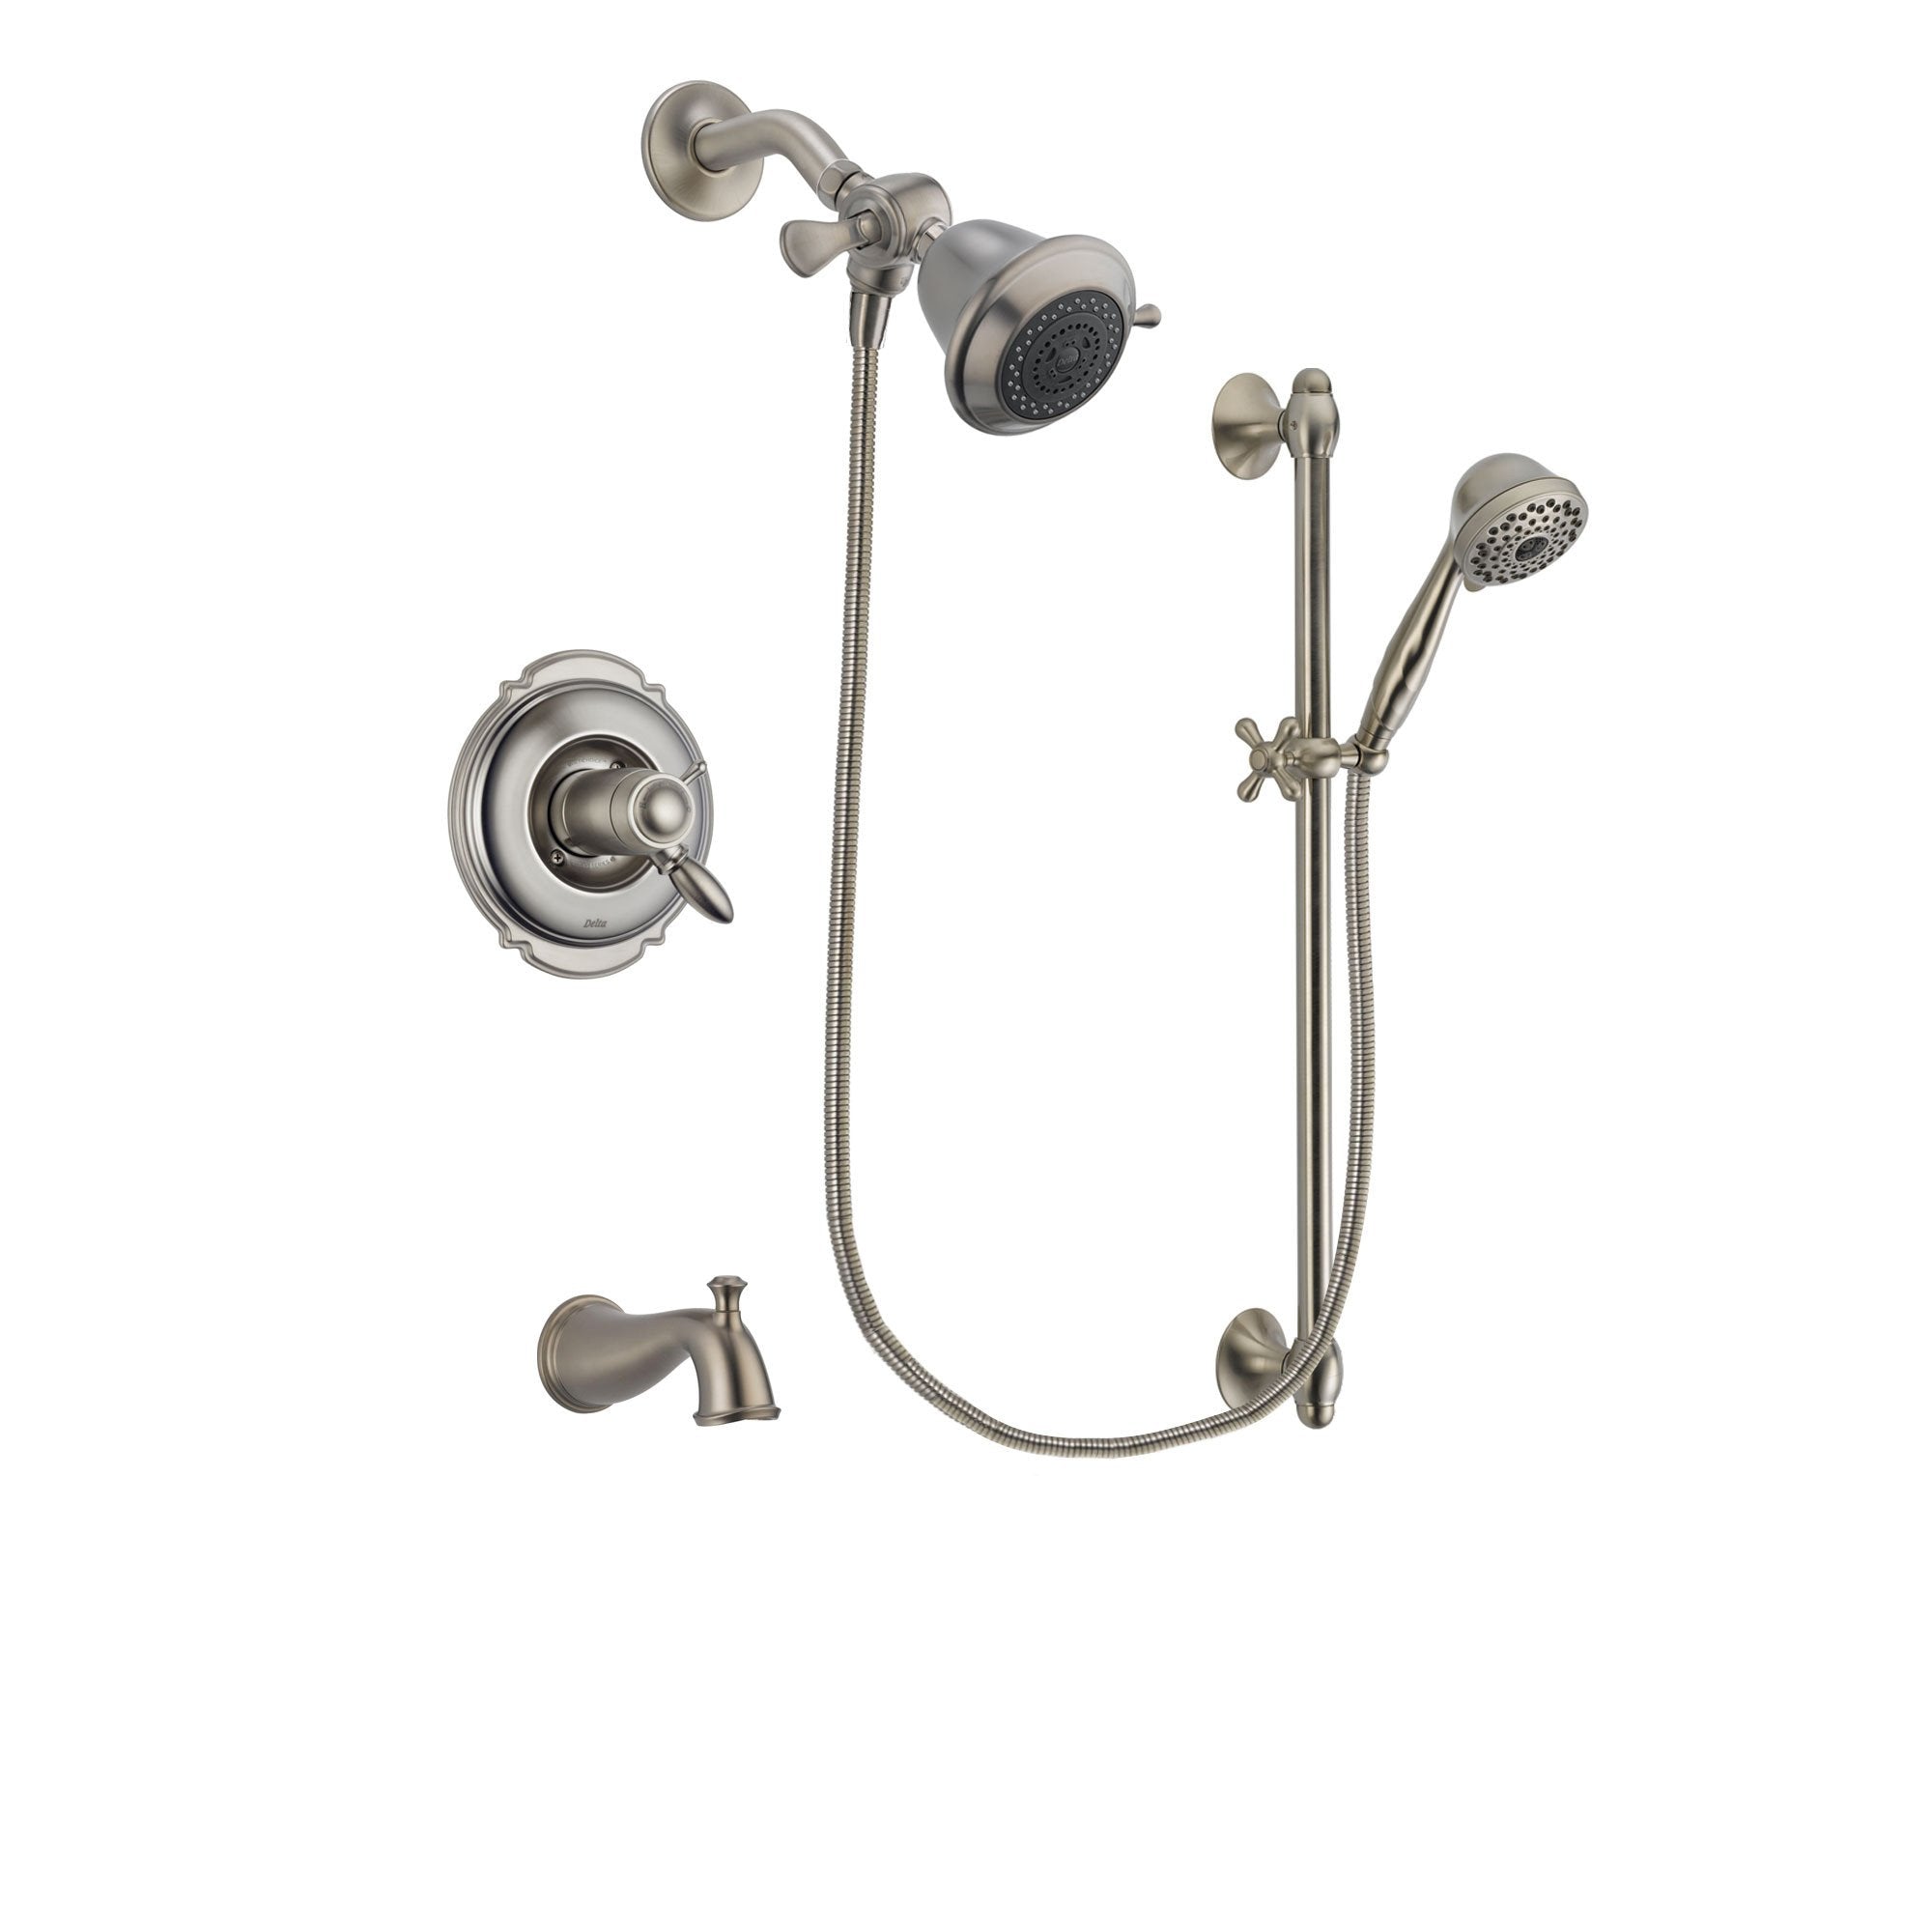 Delta Victorian Stainless Steel Finish Thermostatic Tub and Shower Faucet System Package with Shower Head and 7-Spray Handheld Shower with Slide Bar Includes Rough-in Valve and Tub Spout DSP1651V